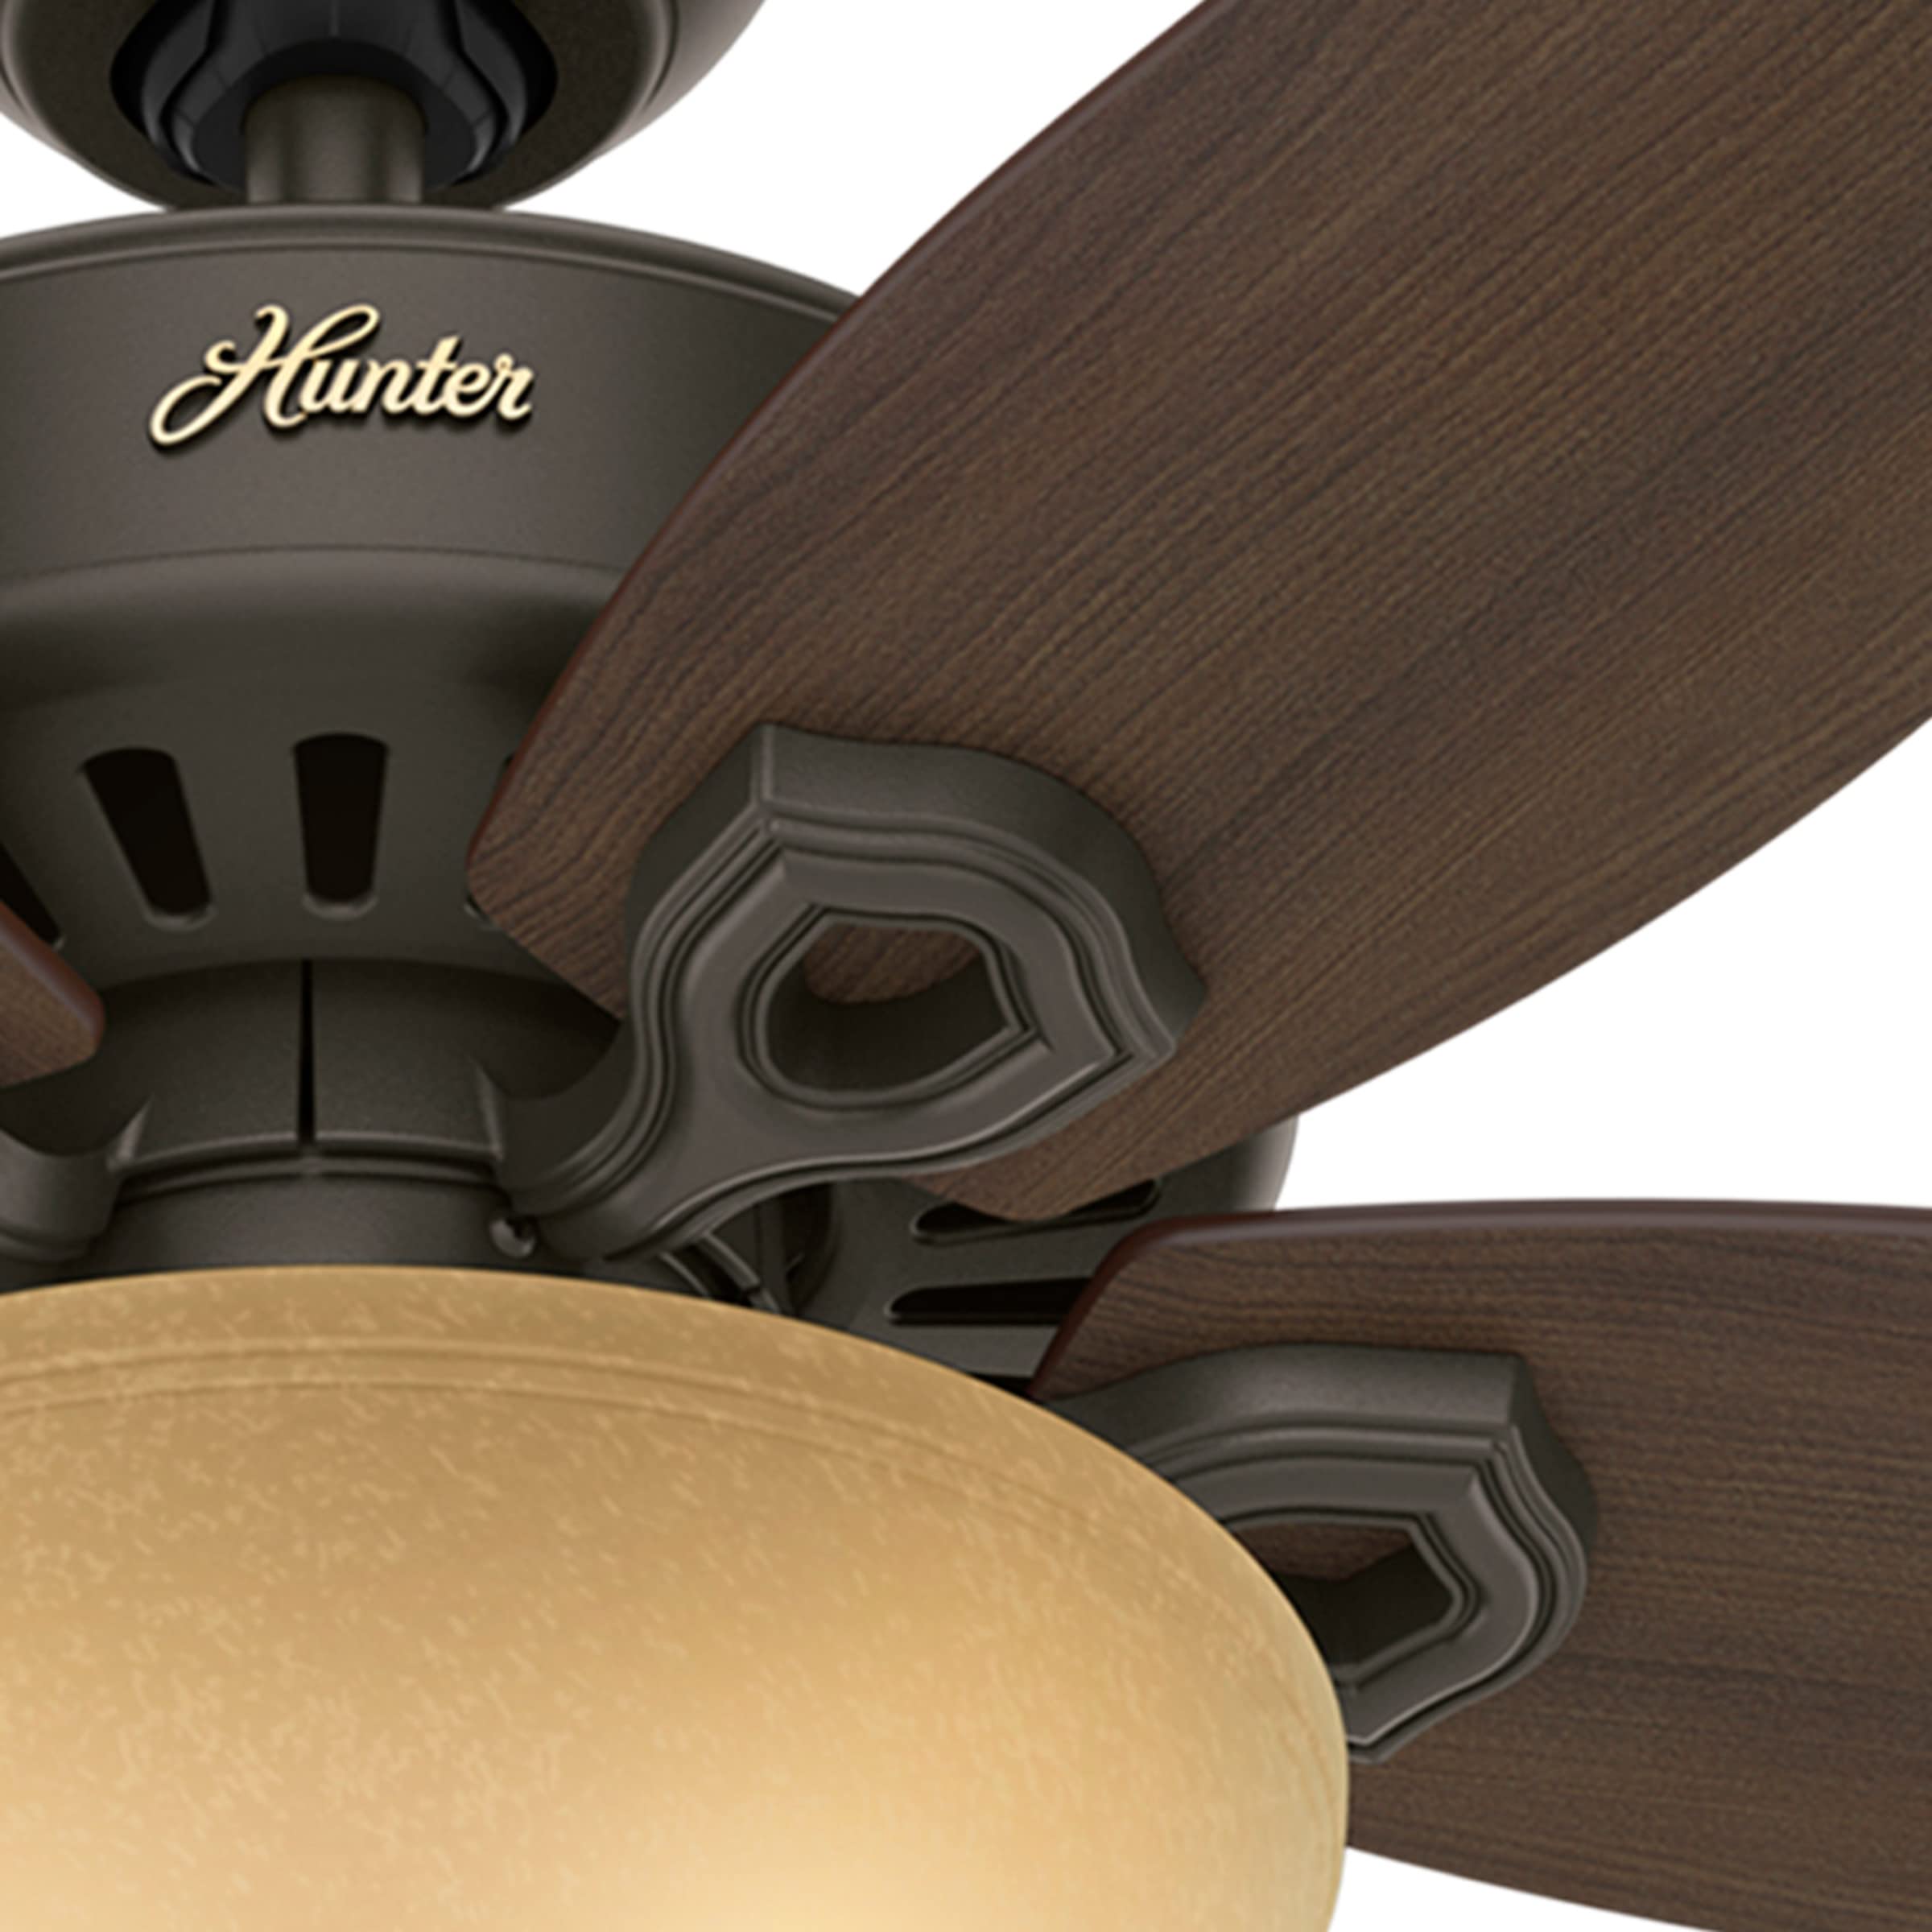 Hunter Fan Company, 52218, 42 inch Builder New Bronze Ceiling Fan with LED Light Kit and Pull Chain